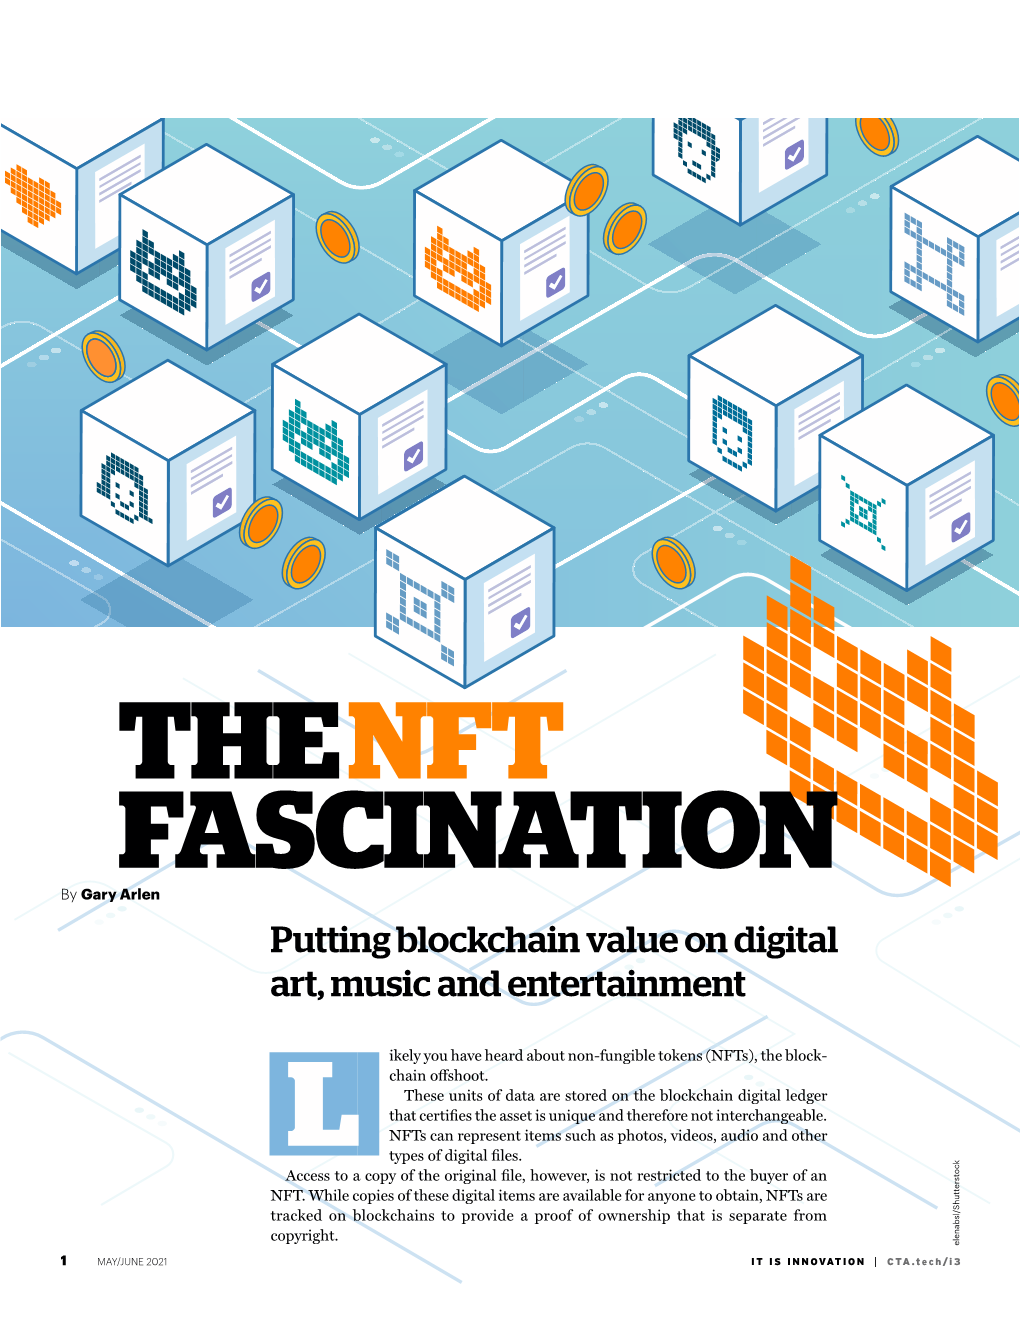 THE NFT FASCINATION by Gary Arlen Putting Blockchain Value on Digital Art, Music and Entertainment